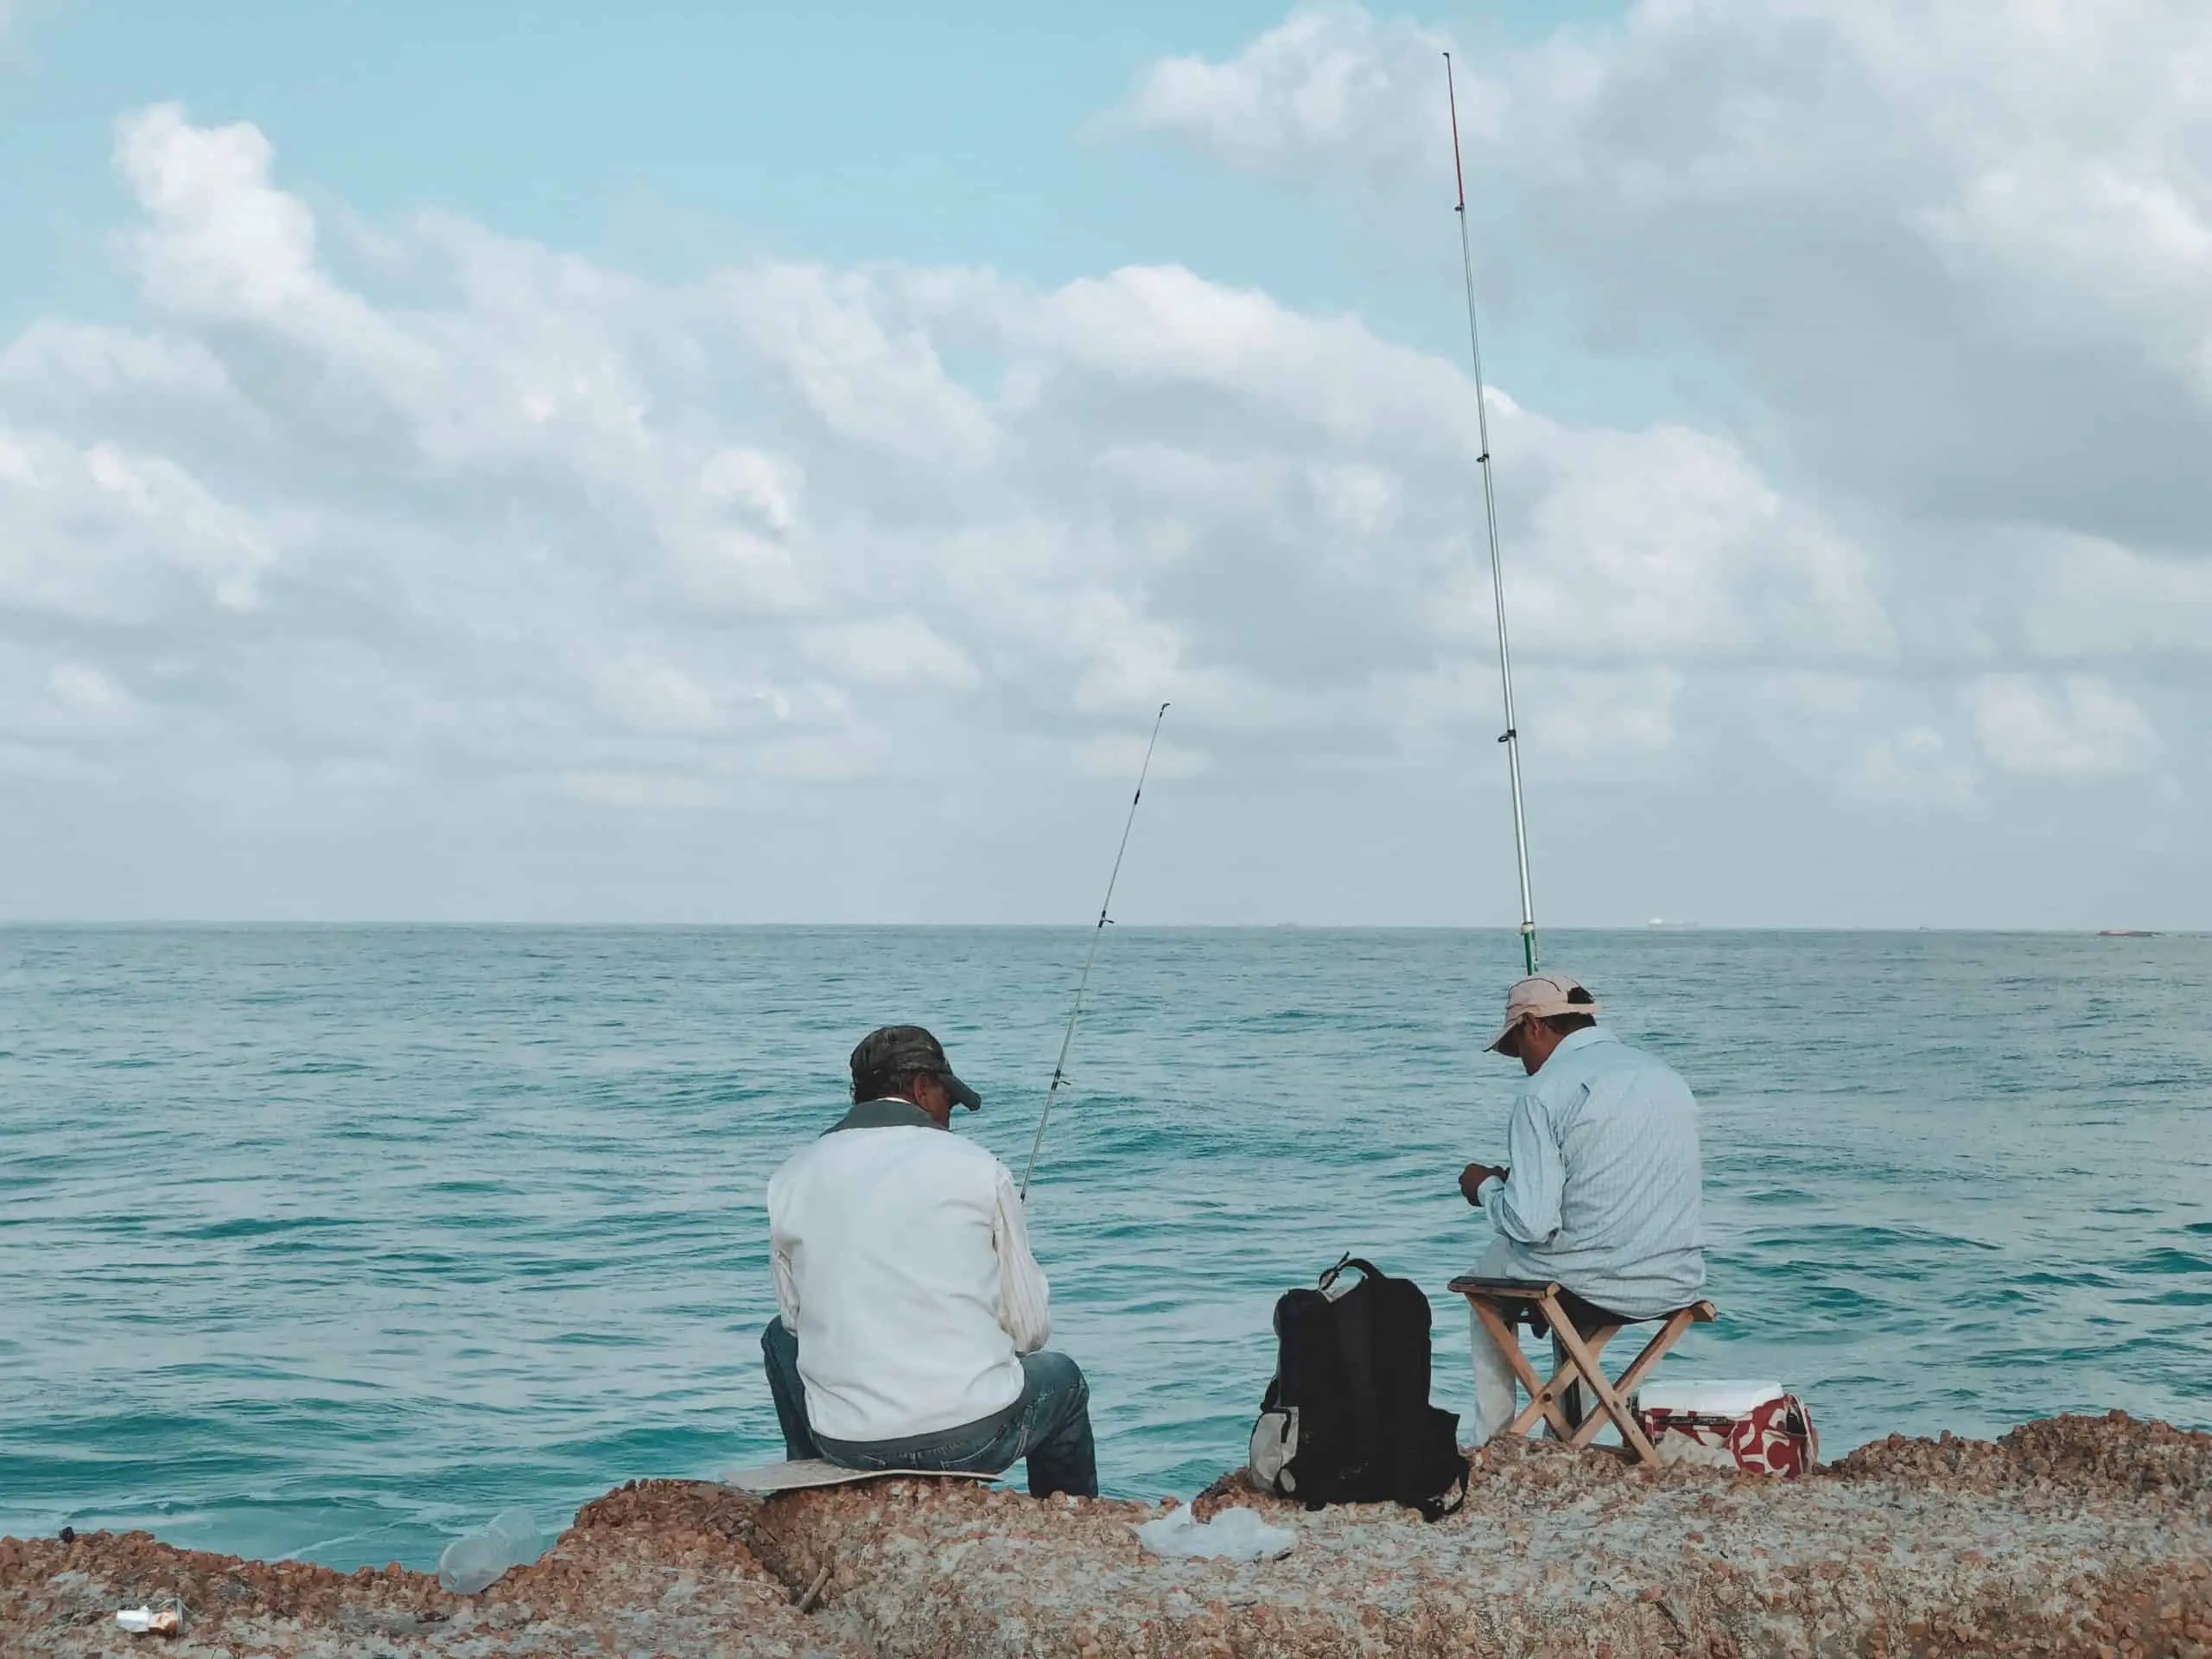 Fishing requires patience: two men sitting on rocks in front of the ocean holding rods waiting for fish to bite